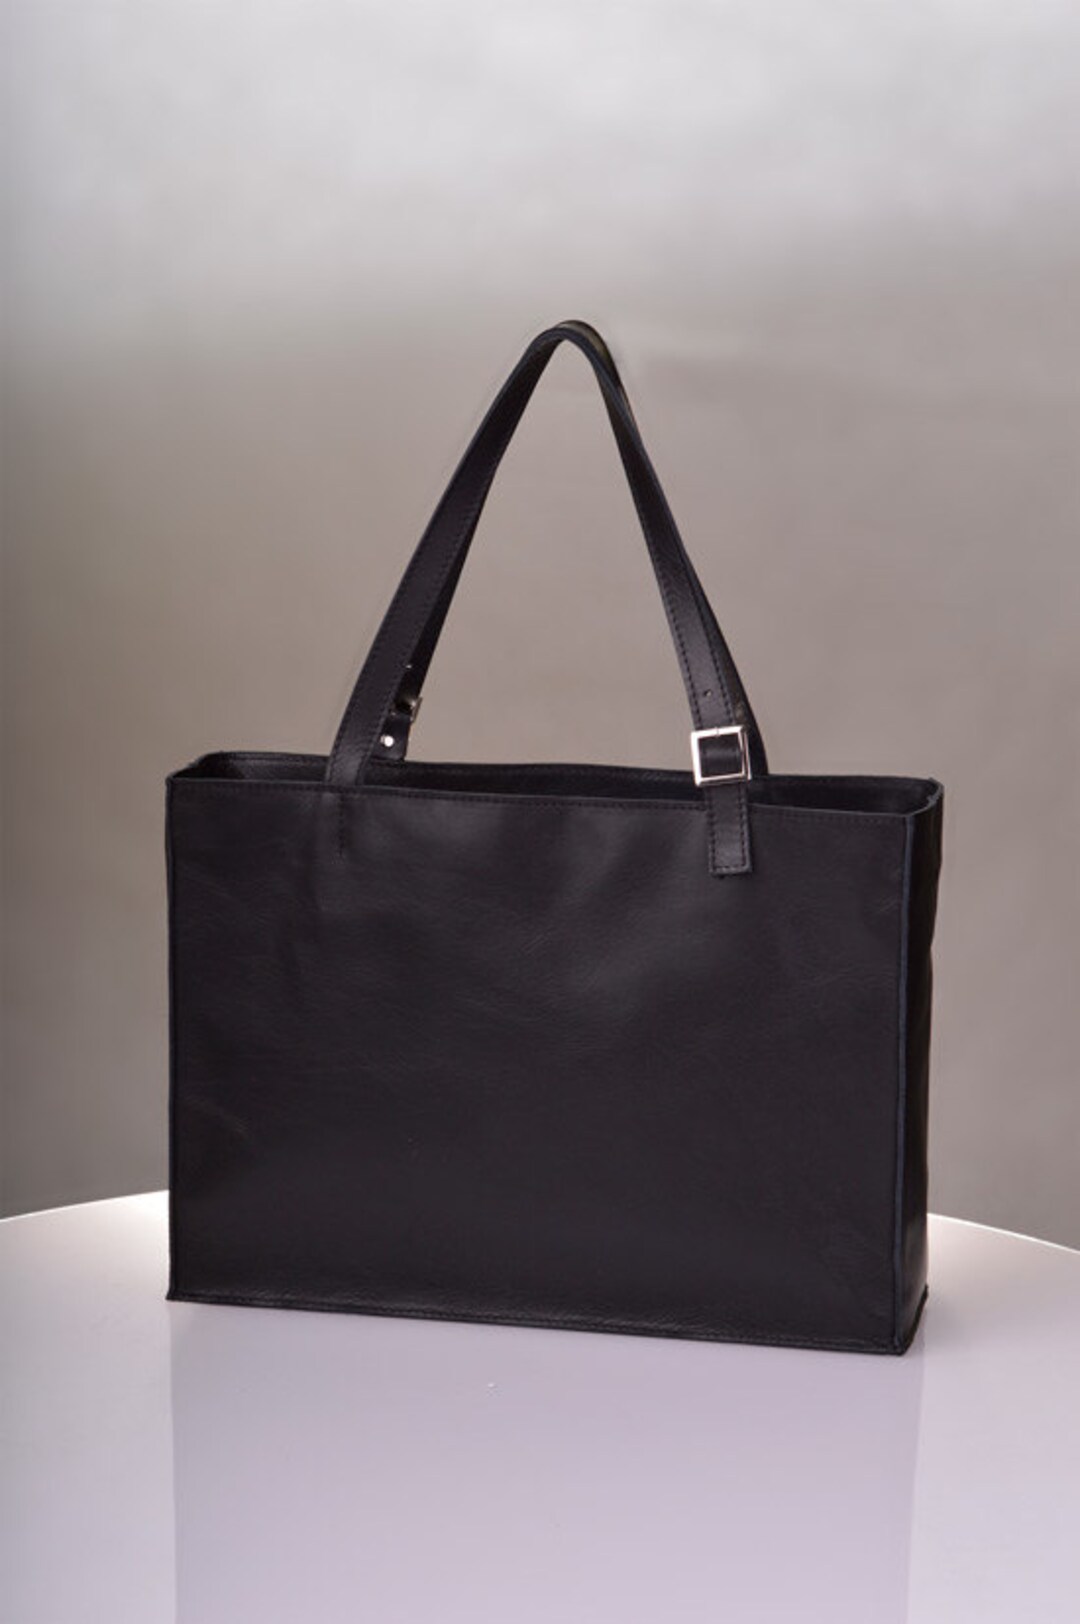 Simple Leather Bag Black Color Genuine Leather Women Tote - Etsy